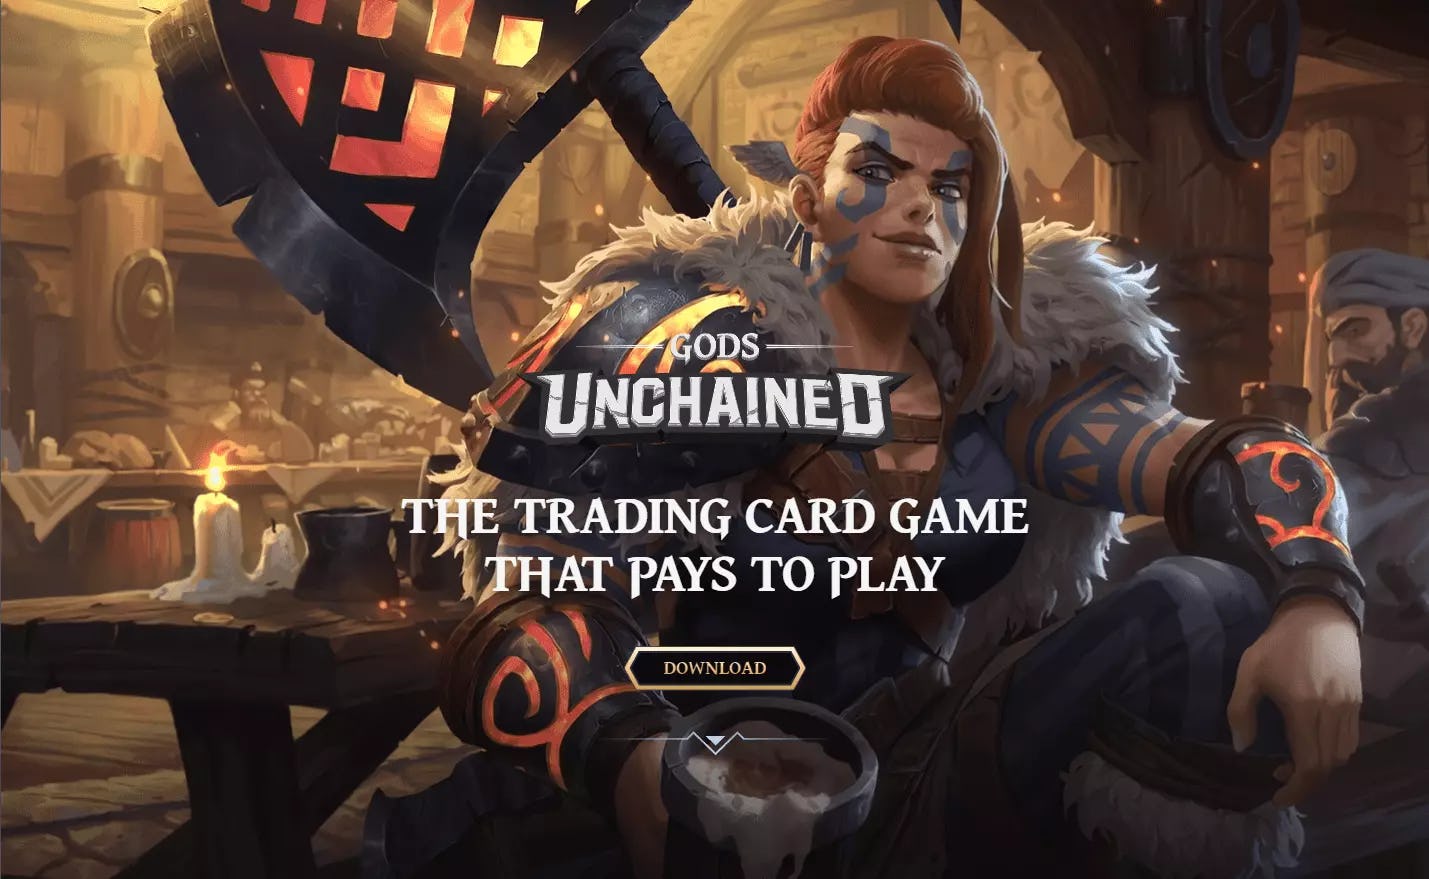 Epic Games Removes Gods Unchained Over Adults Only Rating 